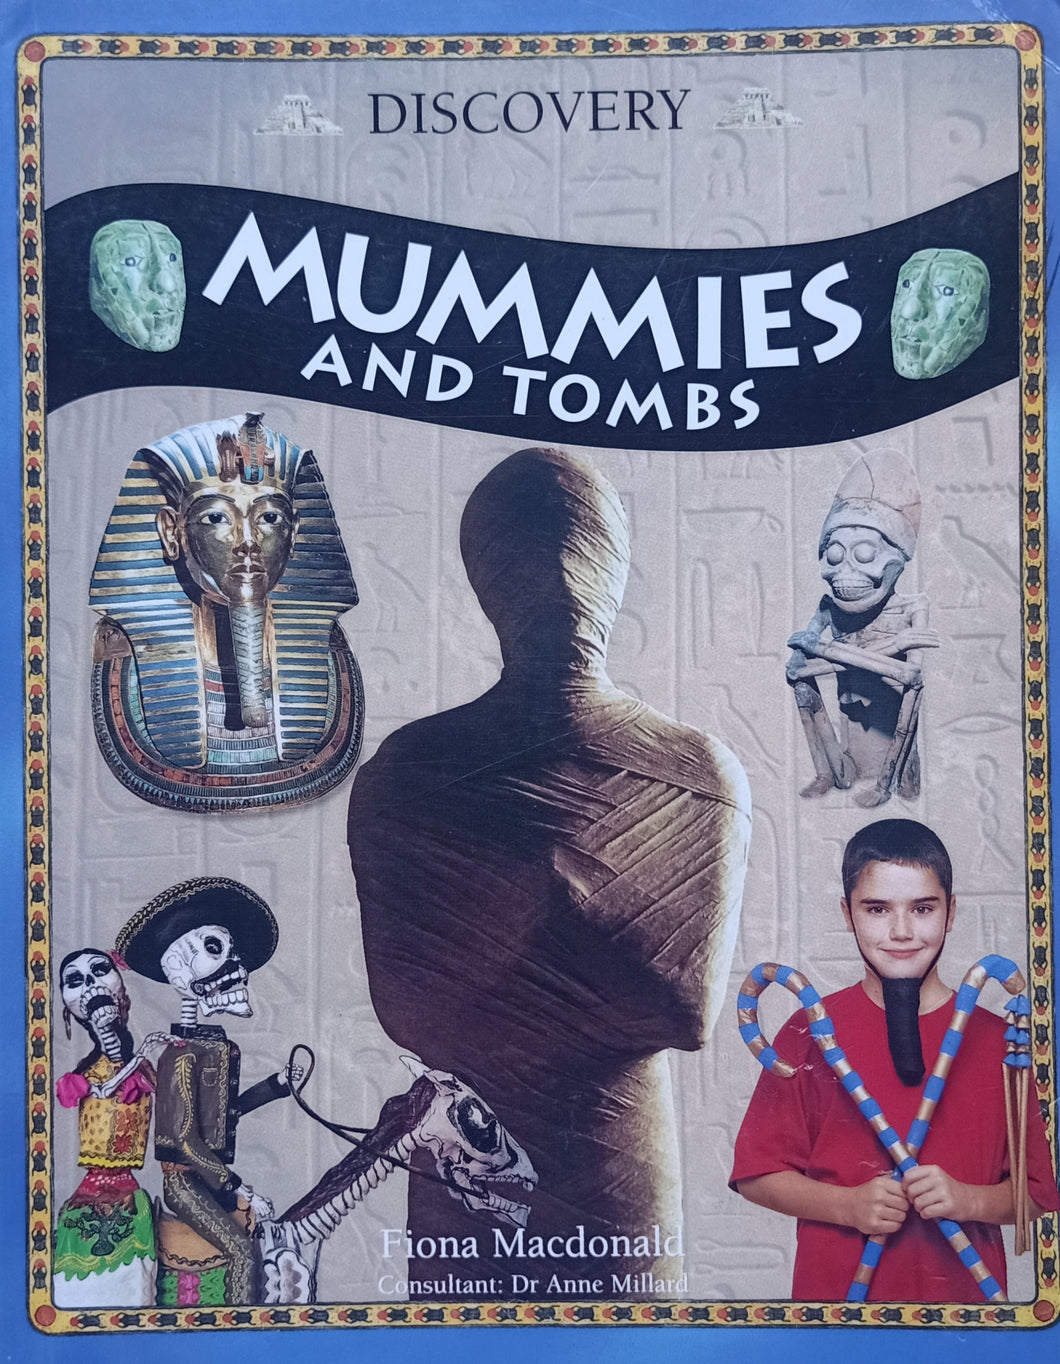 Discovery: Mummies And Tombs by Fiona Macdonald